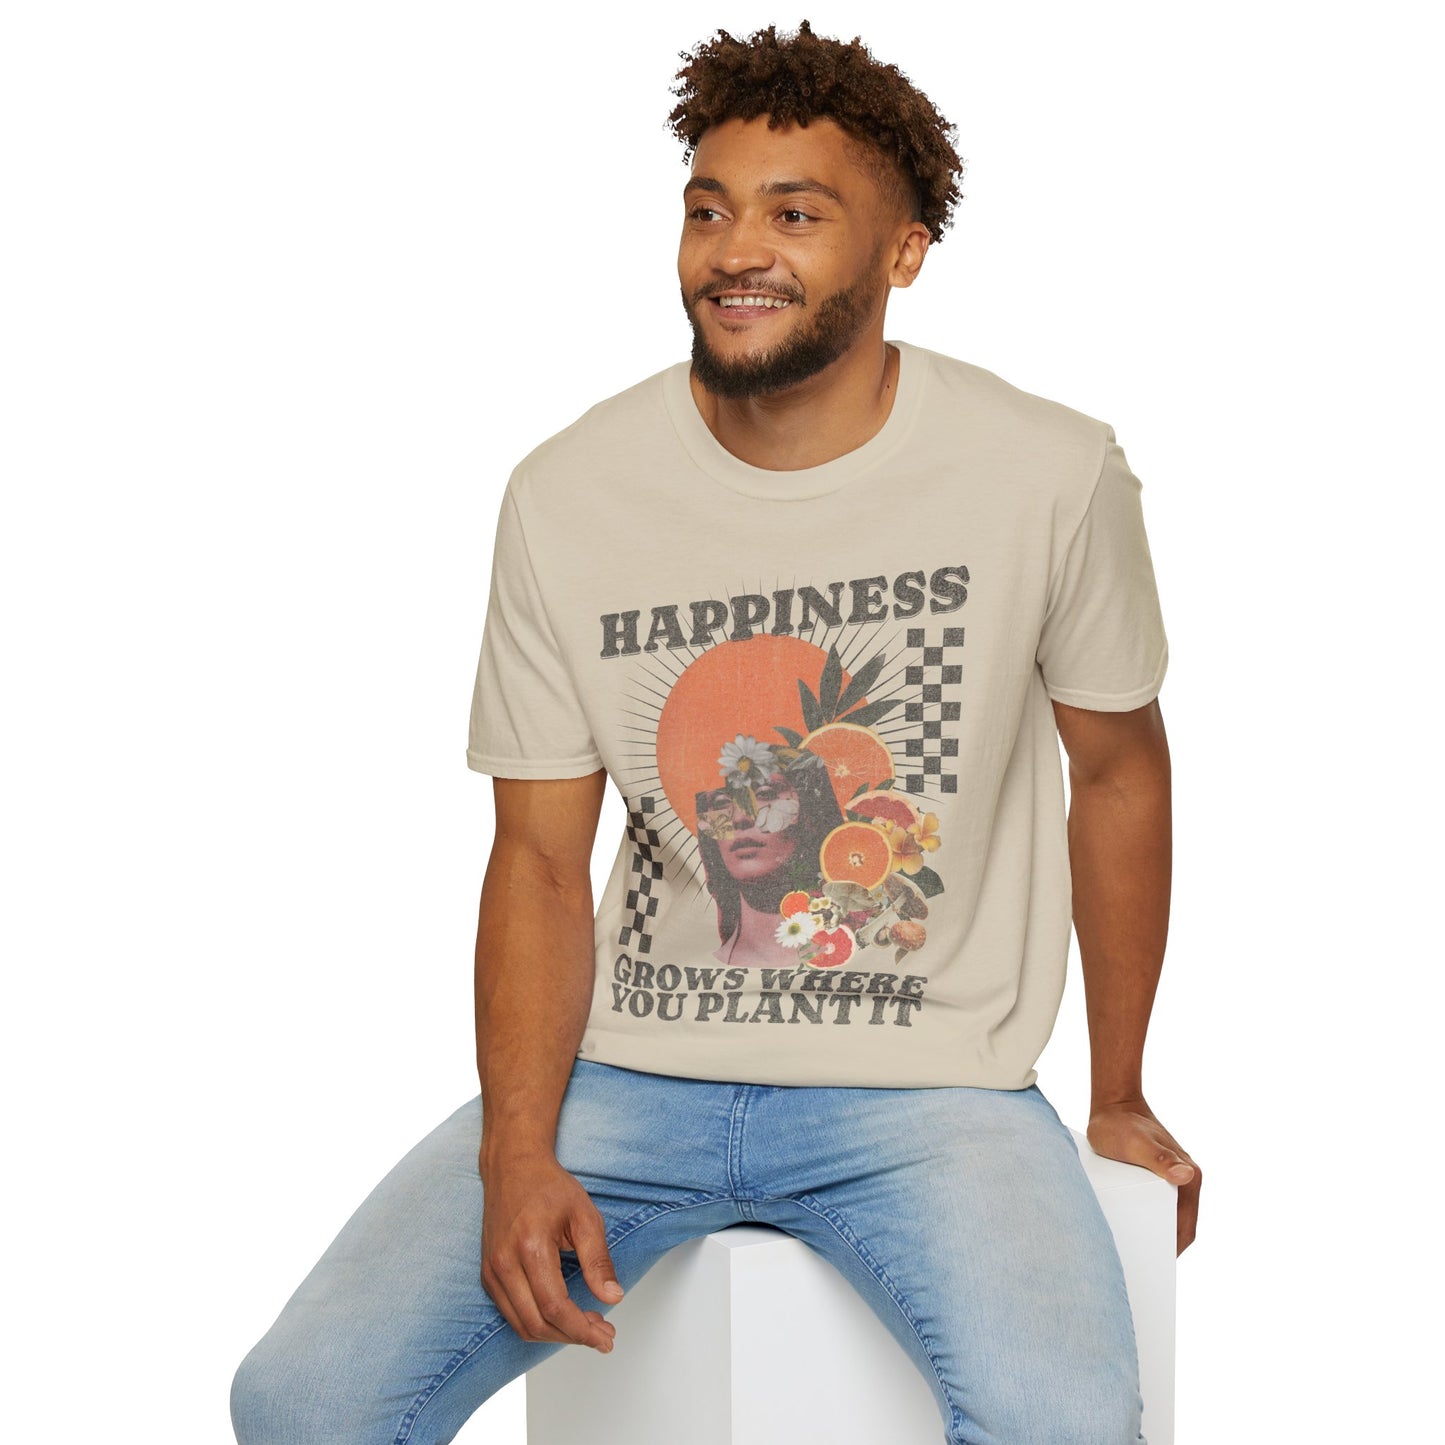 Happiness Grows Where it's Planted T-Shirt Sand